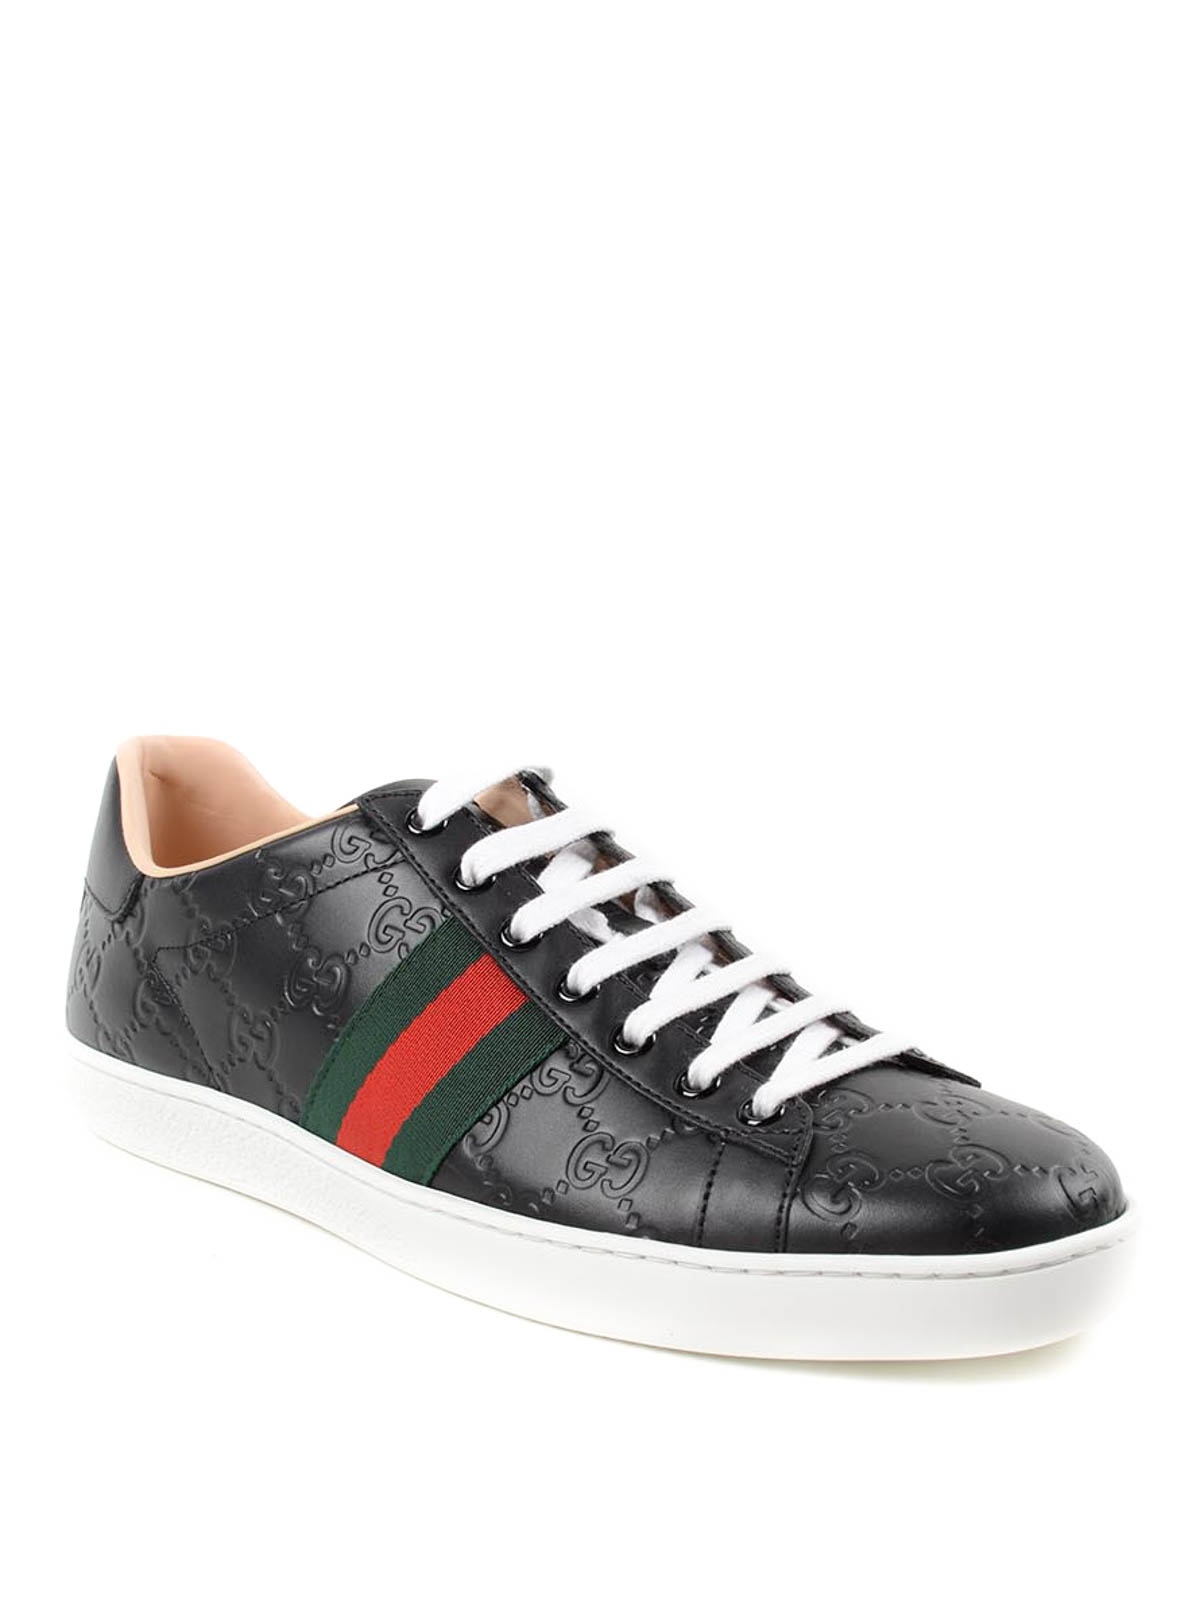 GG leather sneakers by Gucci - trainers | Shop online at wcy.wat.edu.pl